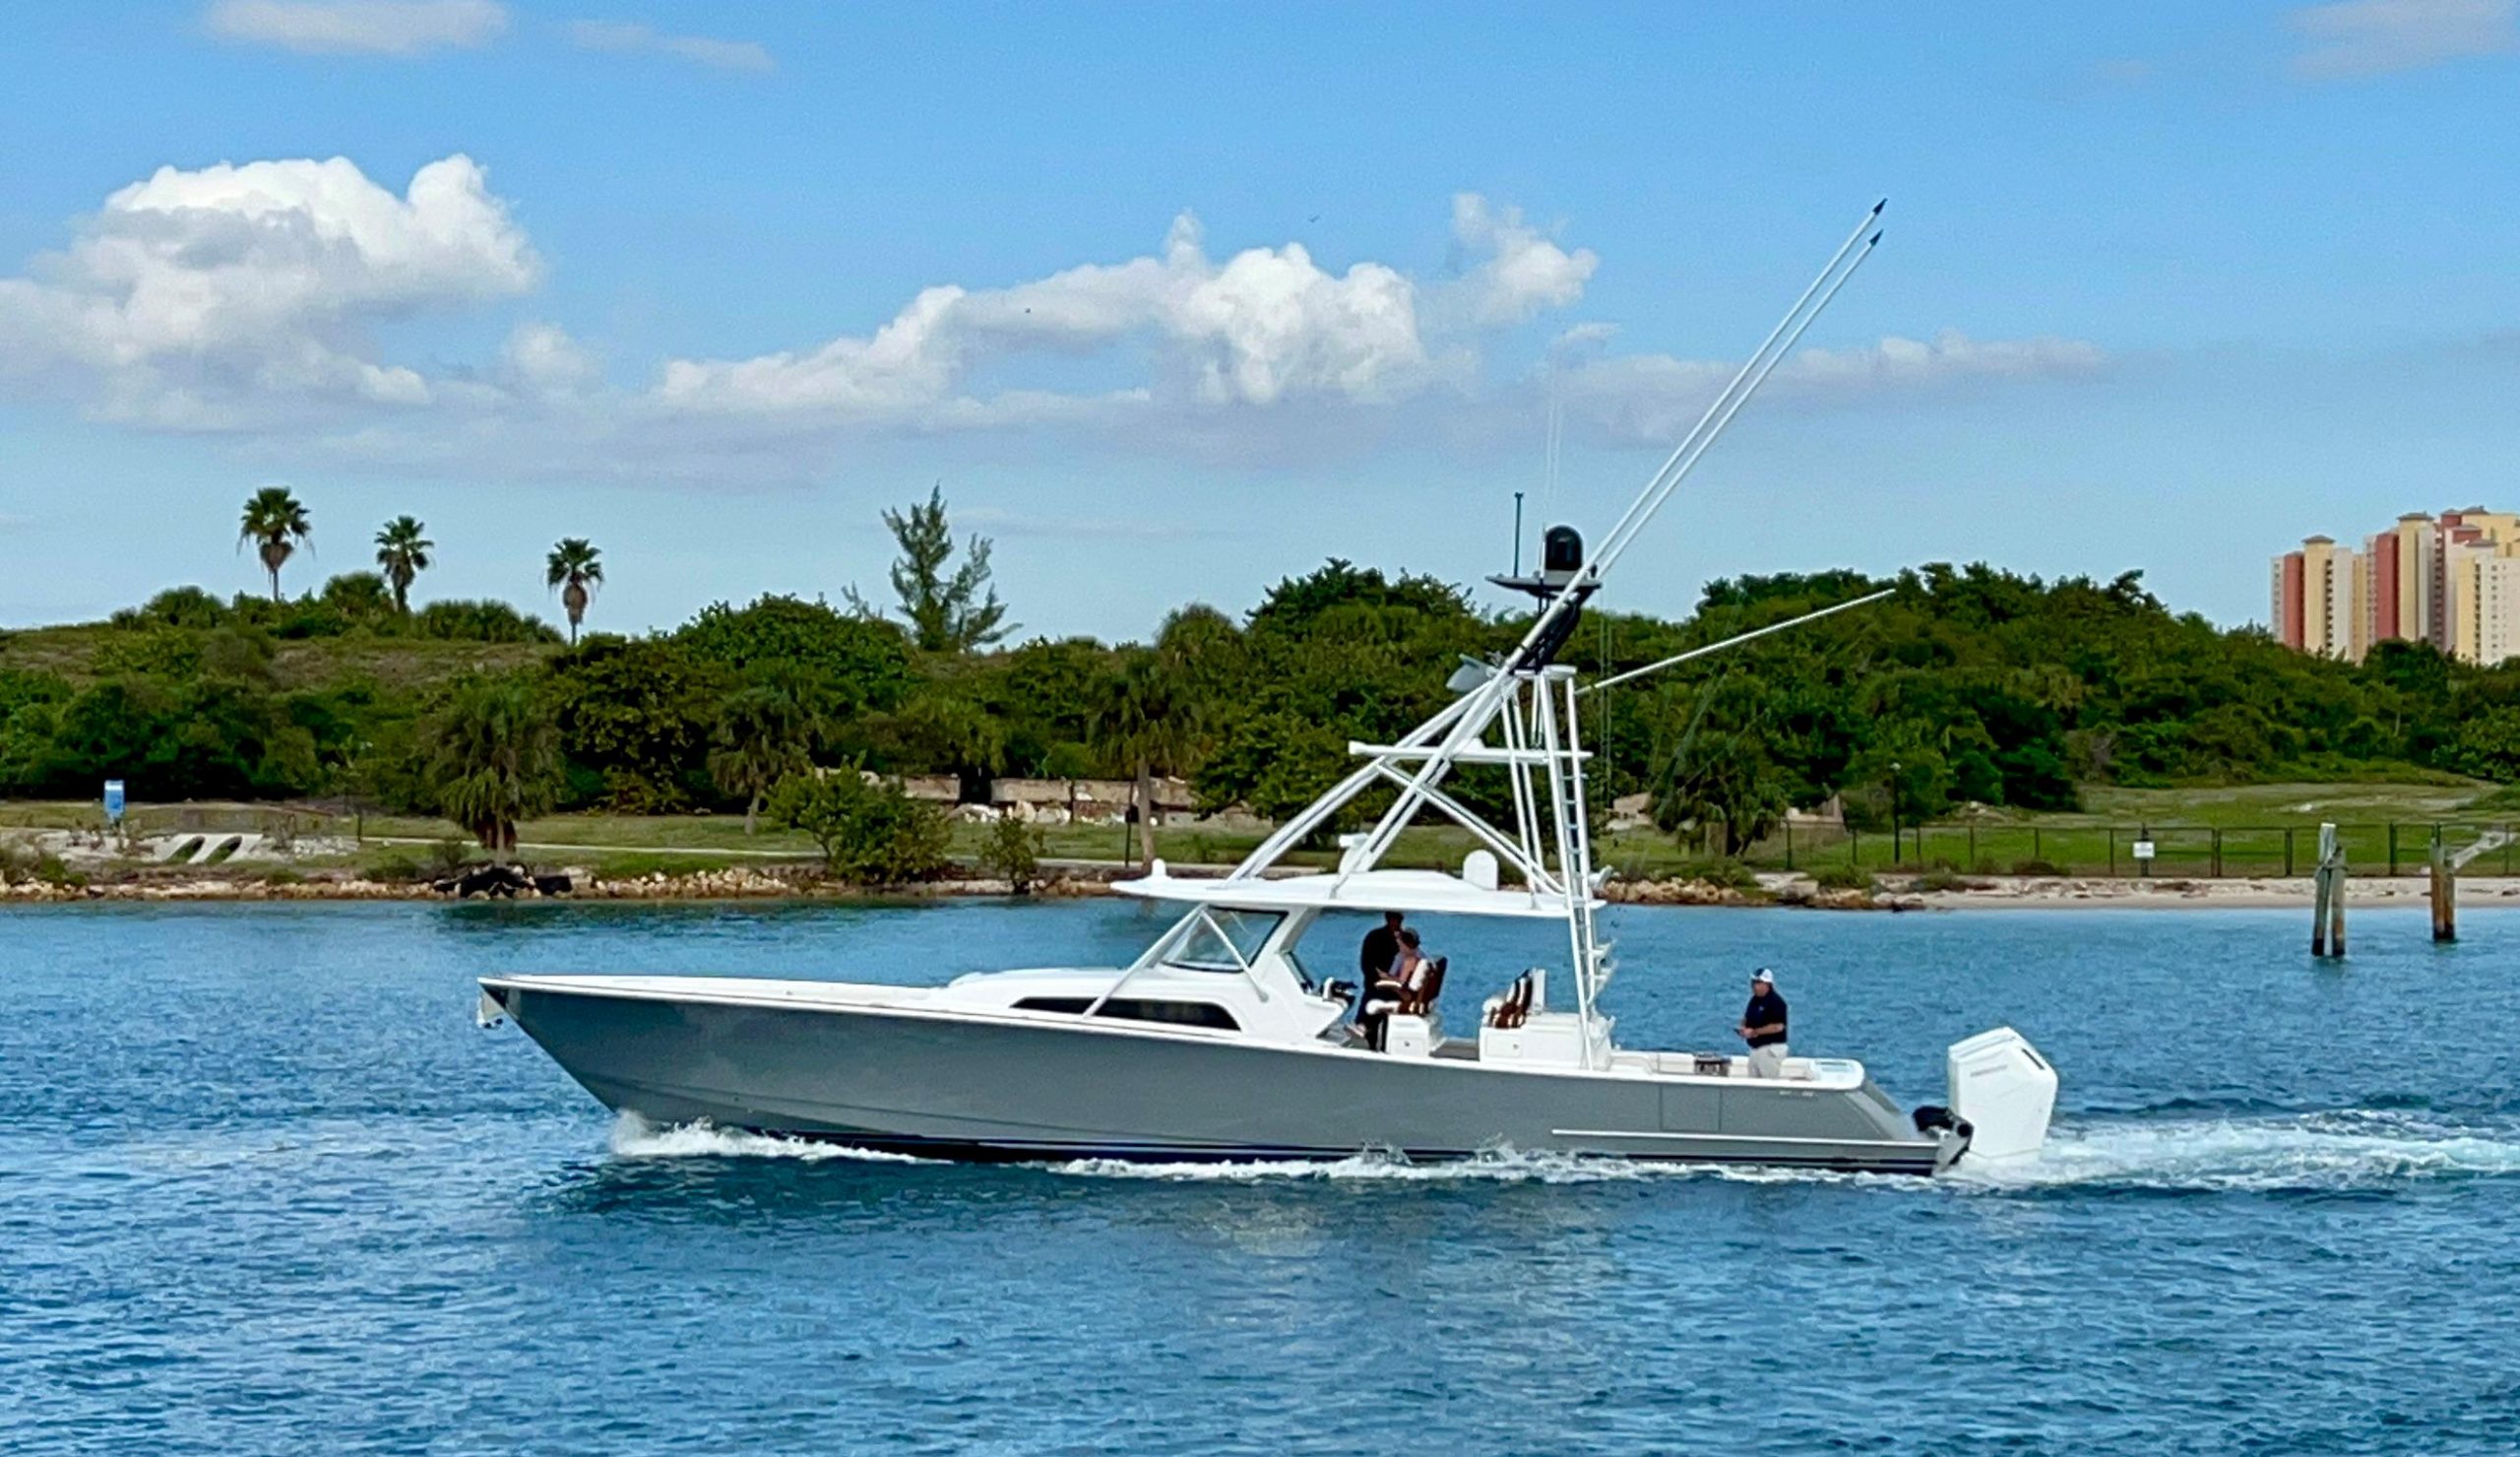 Hot New Boat Models and Tech for Summer 2023 Boating Season